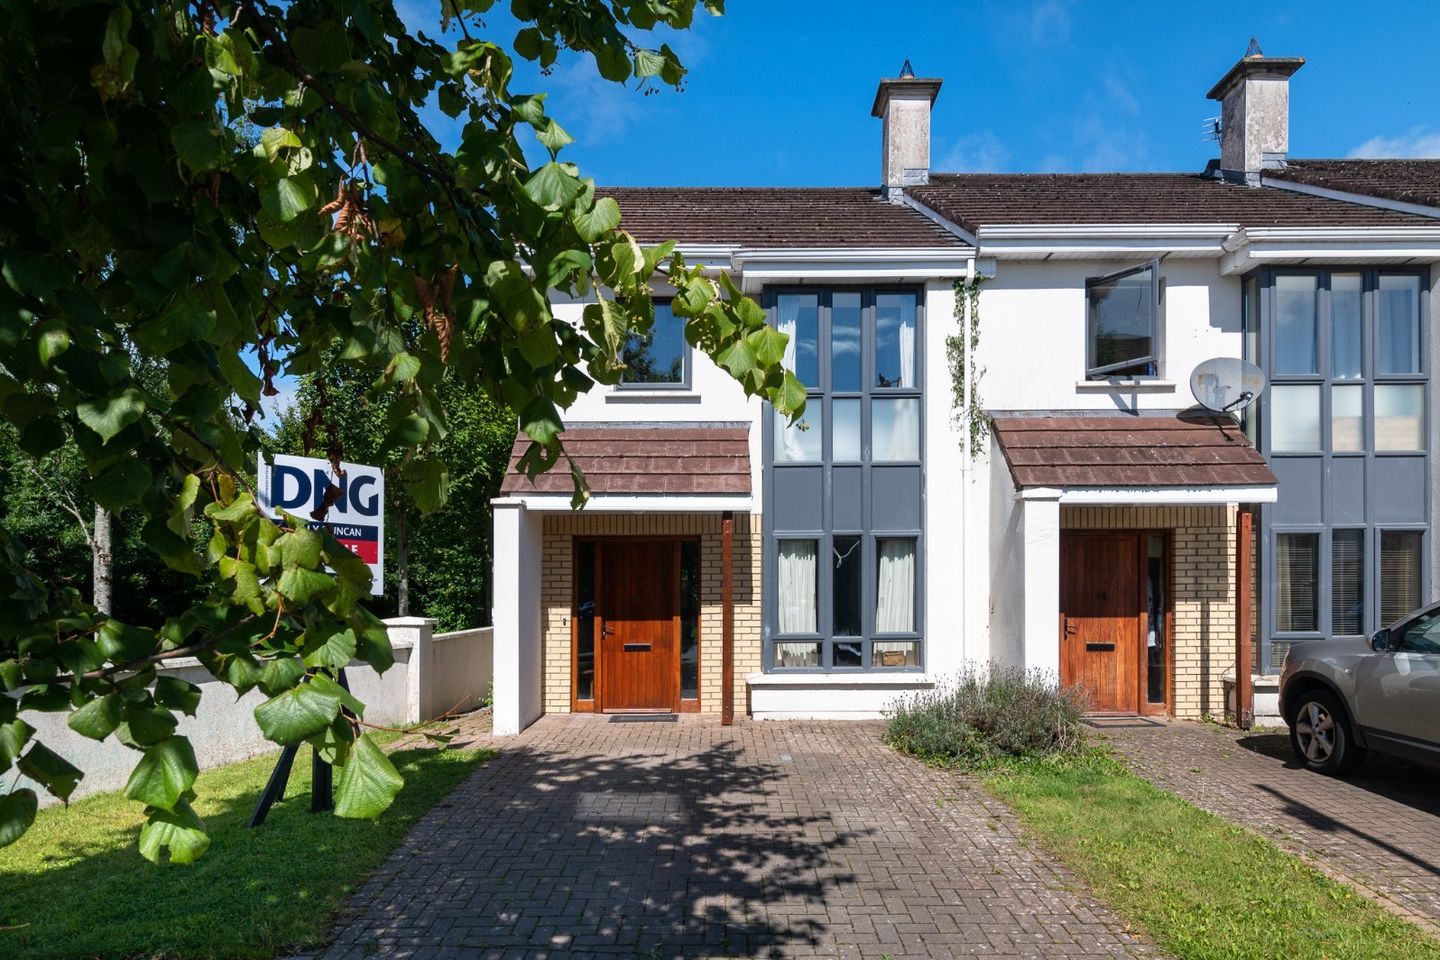 15 Colliers Brook, Tullamore, Co. Offaly